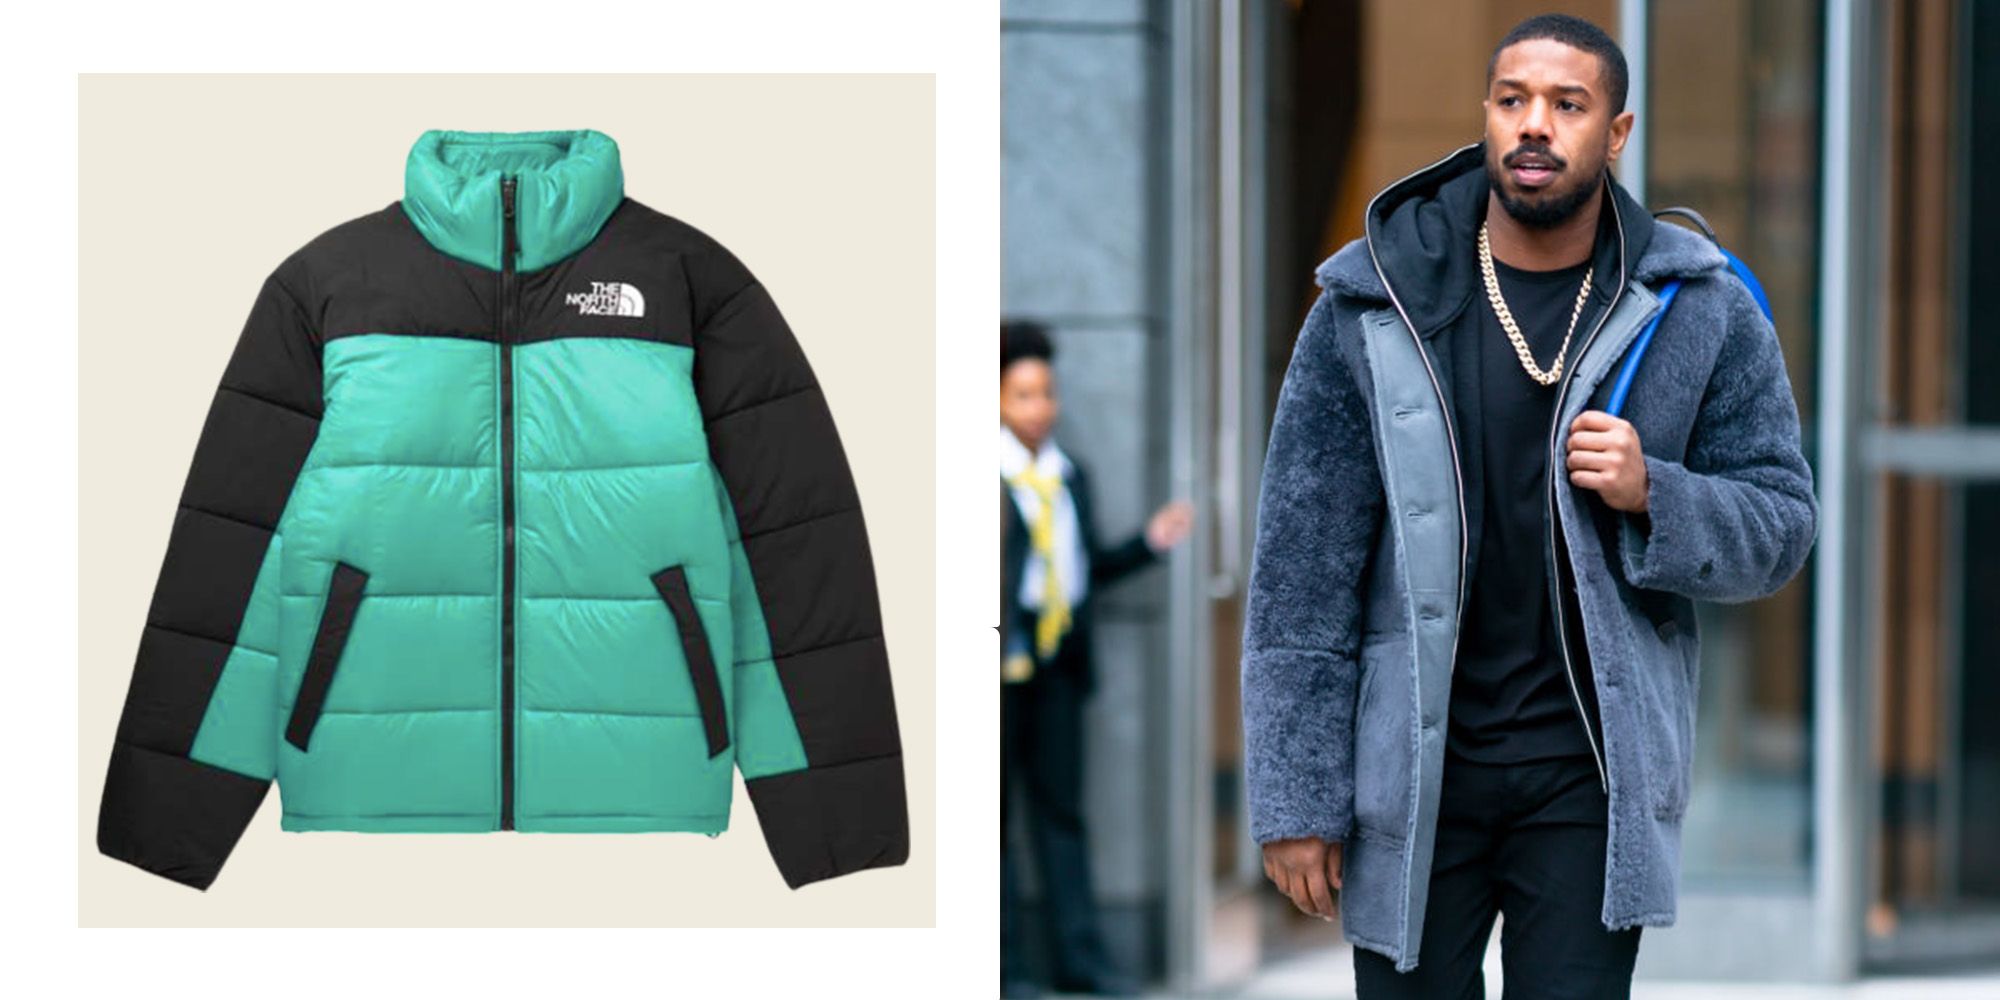 The Best Men's Winter Coats to Shop in the Black Friday sales